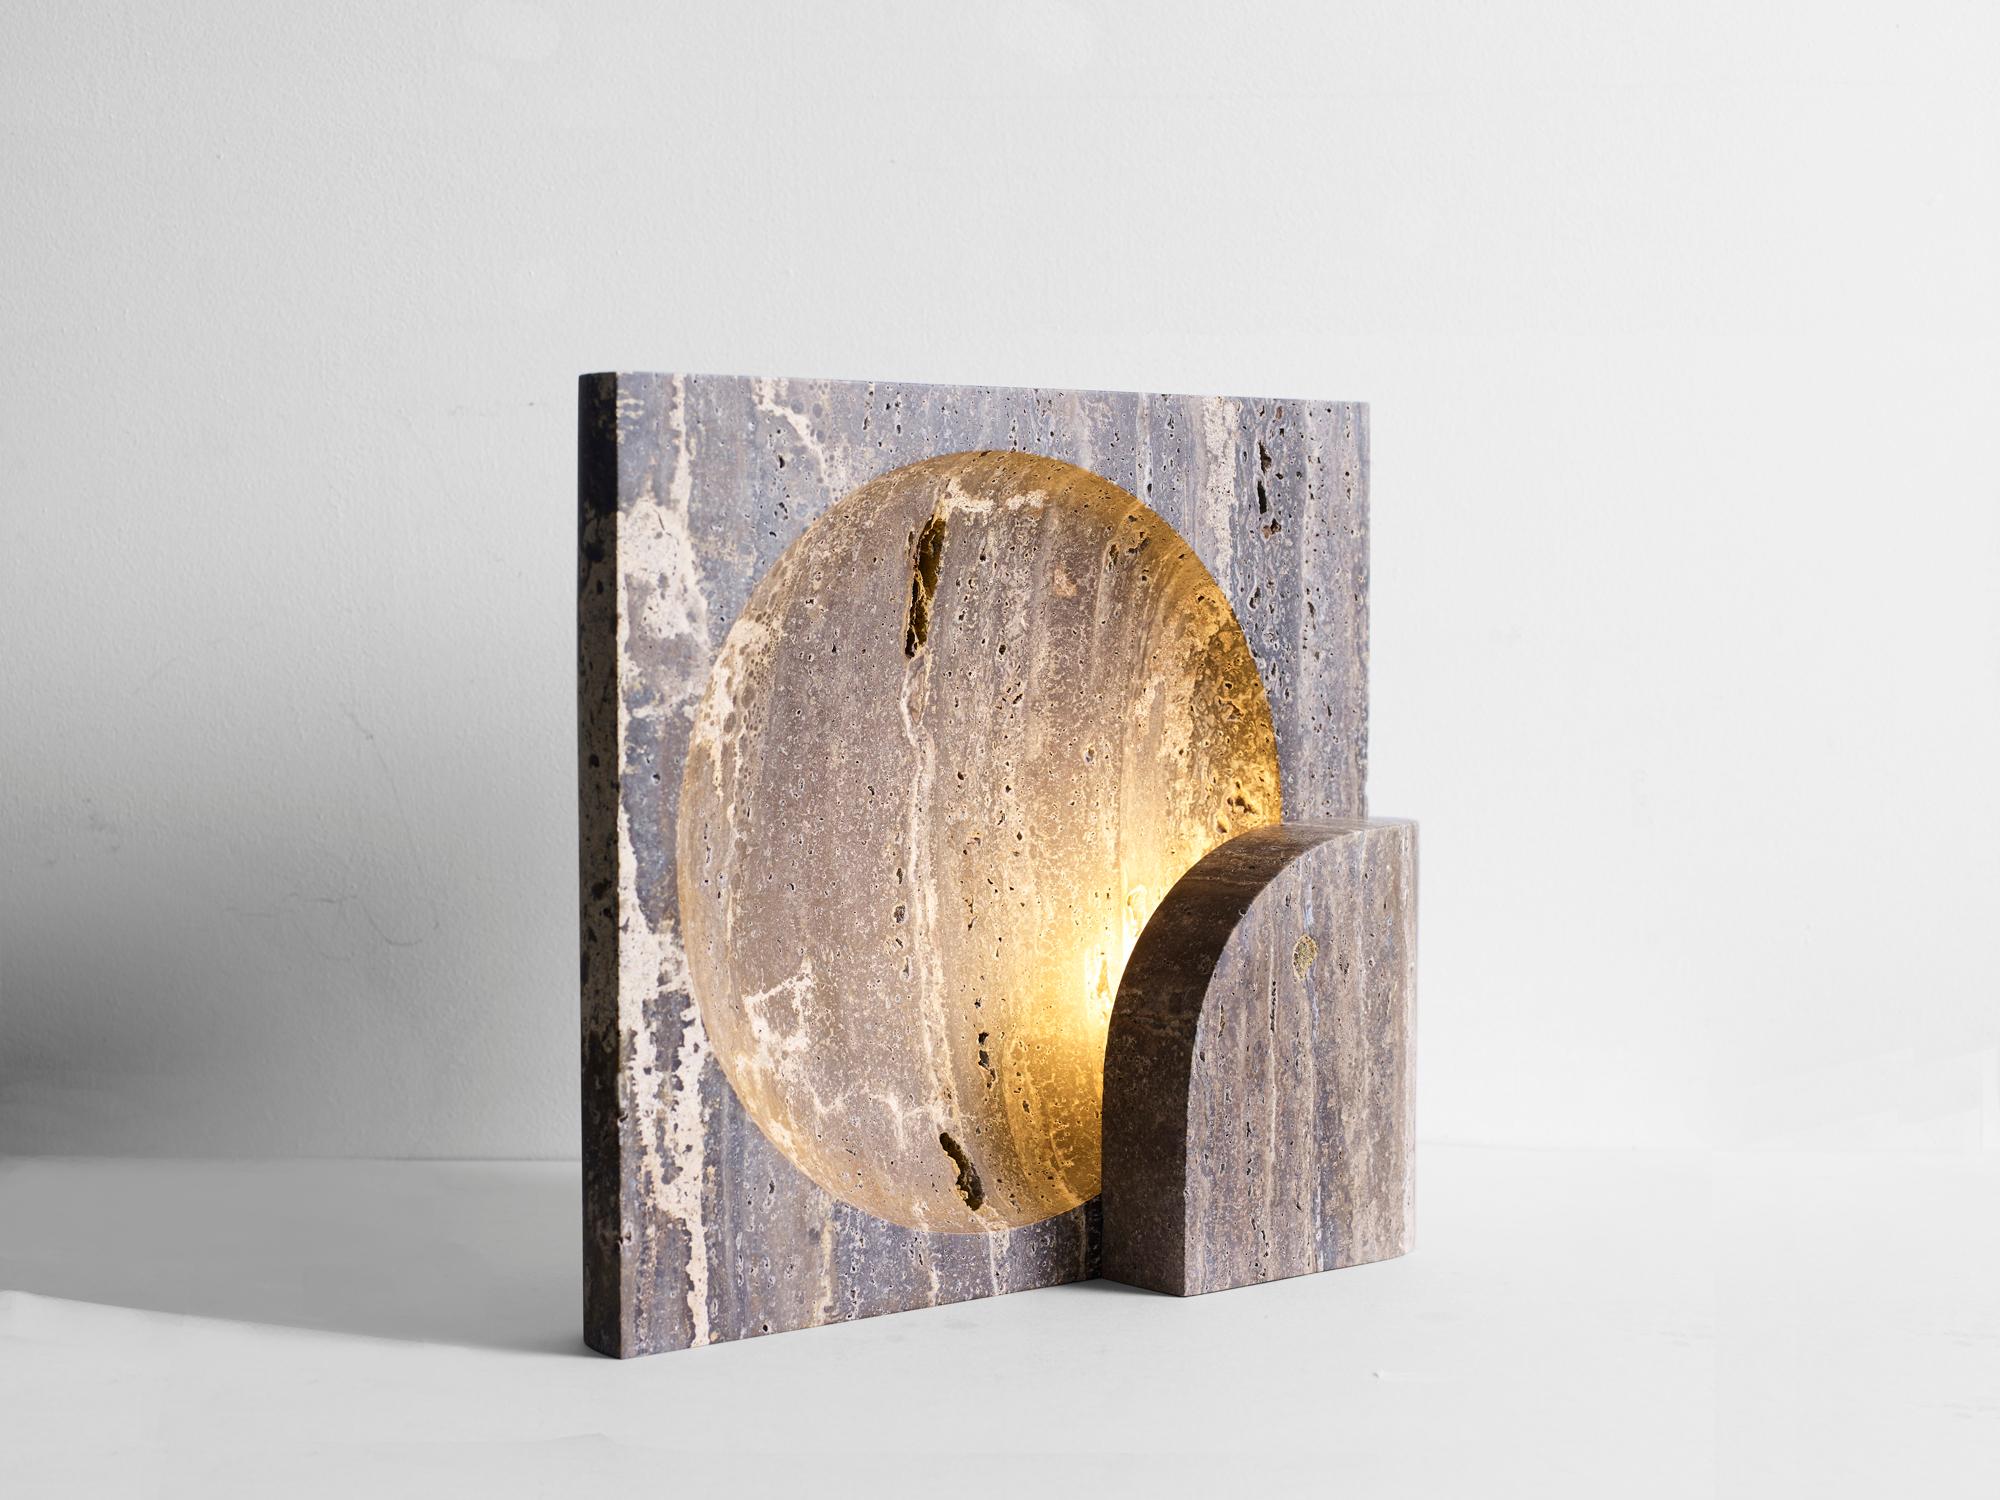 This sculptural item is handmade in Sydney, Australia.

This block table lamp is an ambient, sculptural light carved in two halves from solid stone.

Each light is manufactured in natural stone, meaning variations of the pattern in the stone